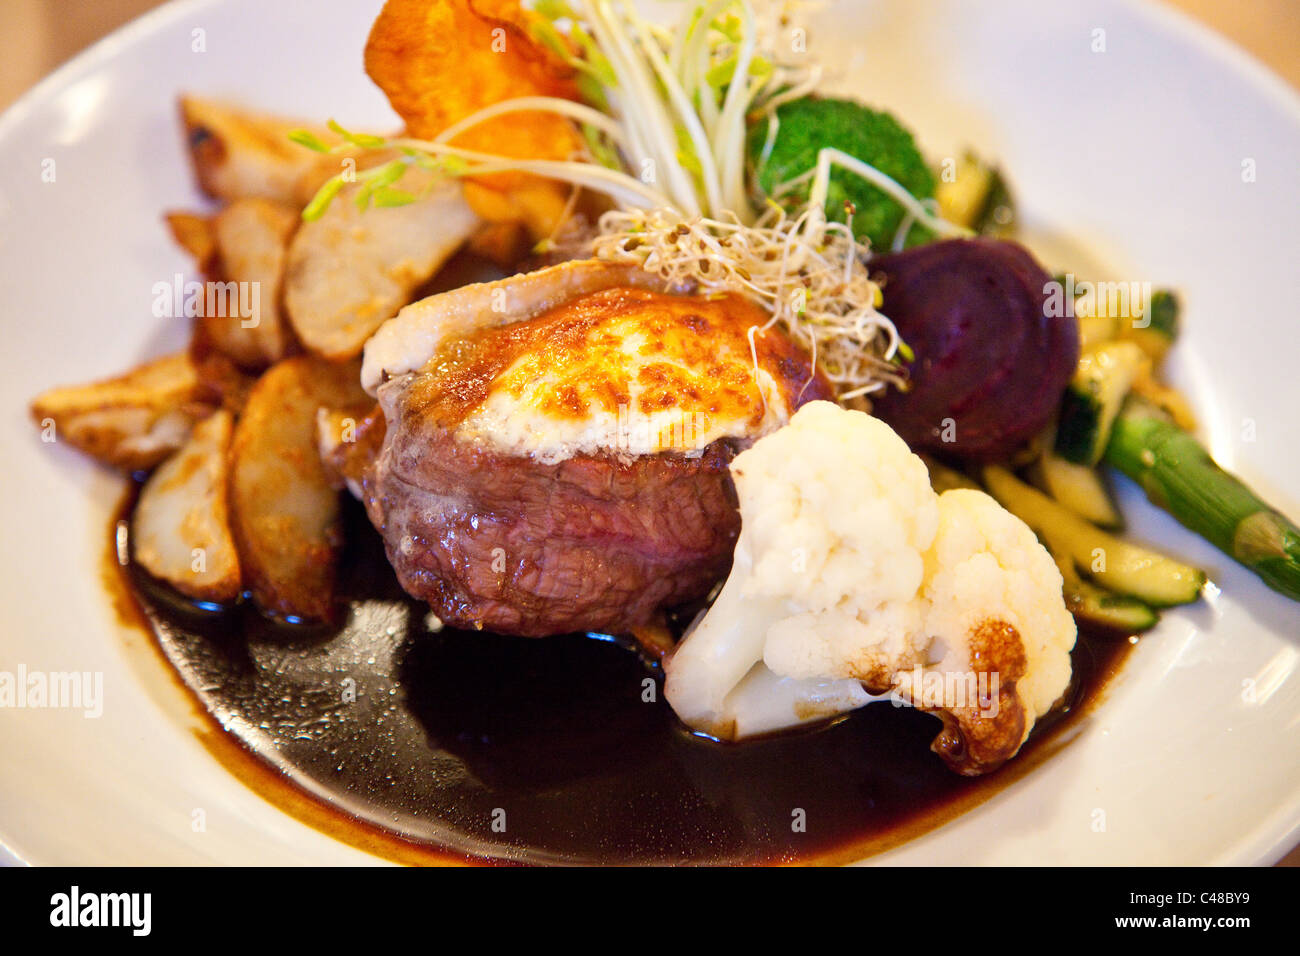 Filet mignon at Le Lapin Saute restaurant in old town, Quebec City, Canada Stock Photo